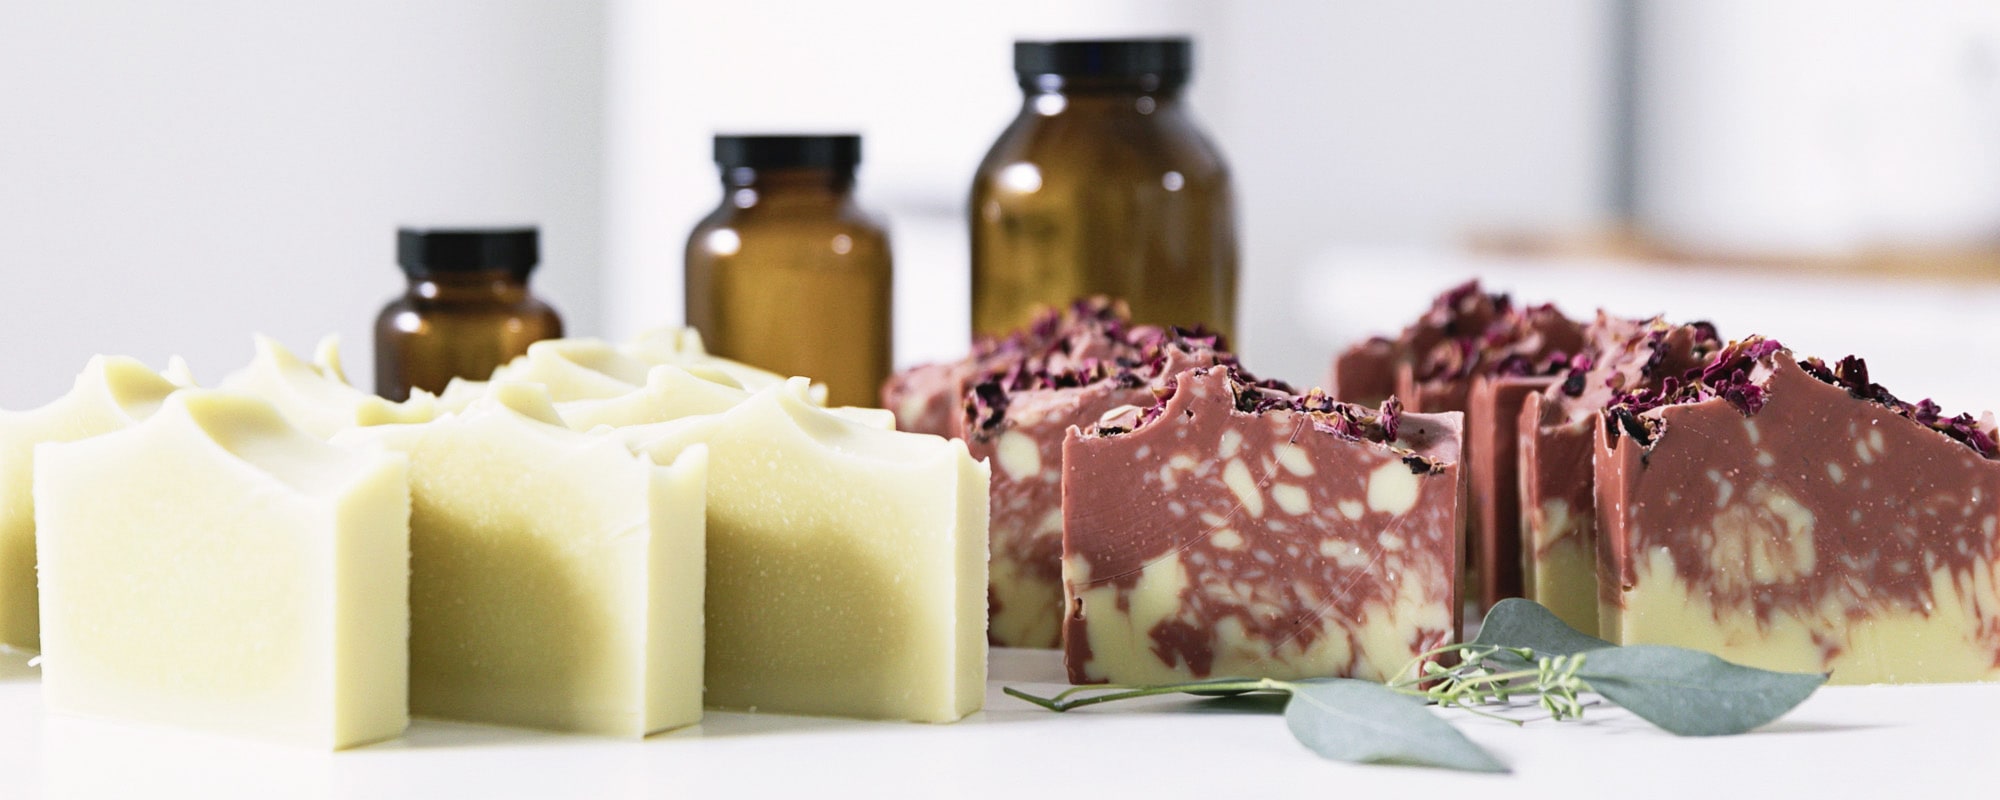 Premium Traditional Cold Press Soap | Lotion Bar | Ashley Marie | The Crafter's Box